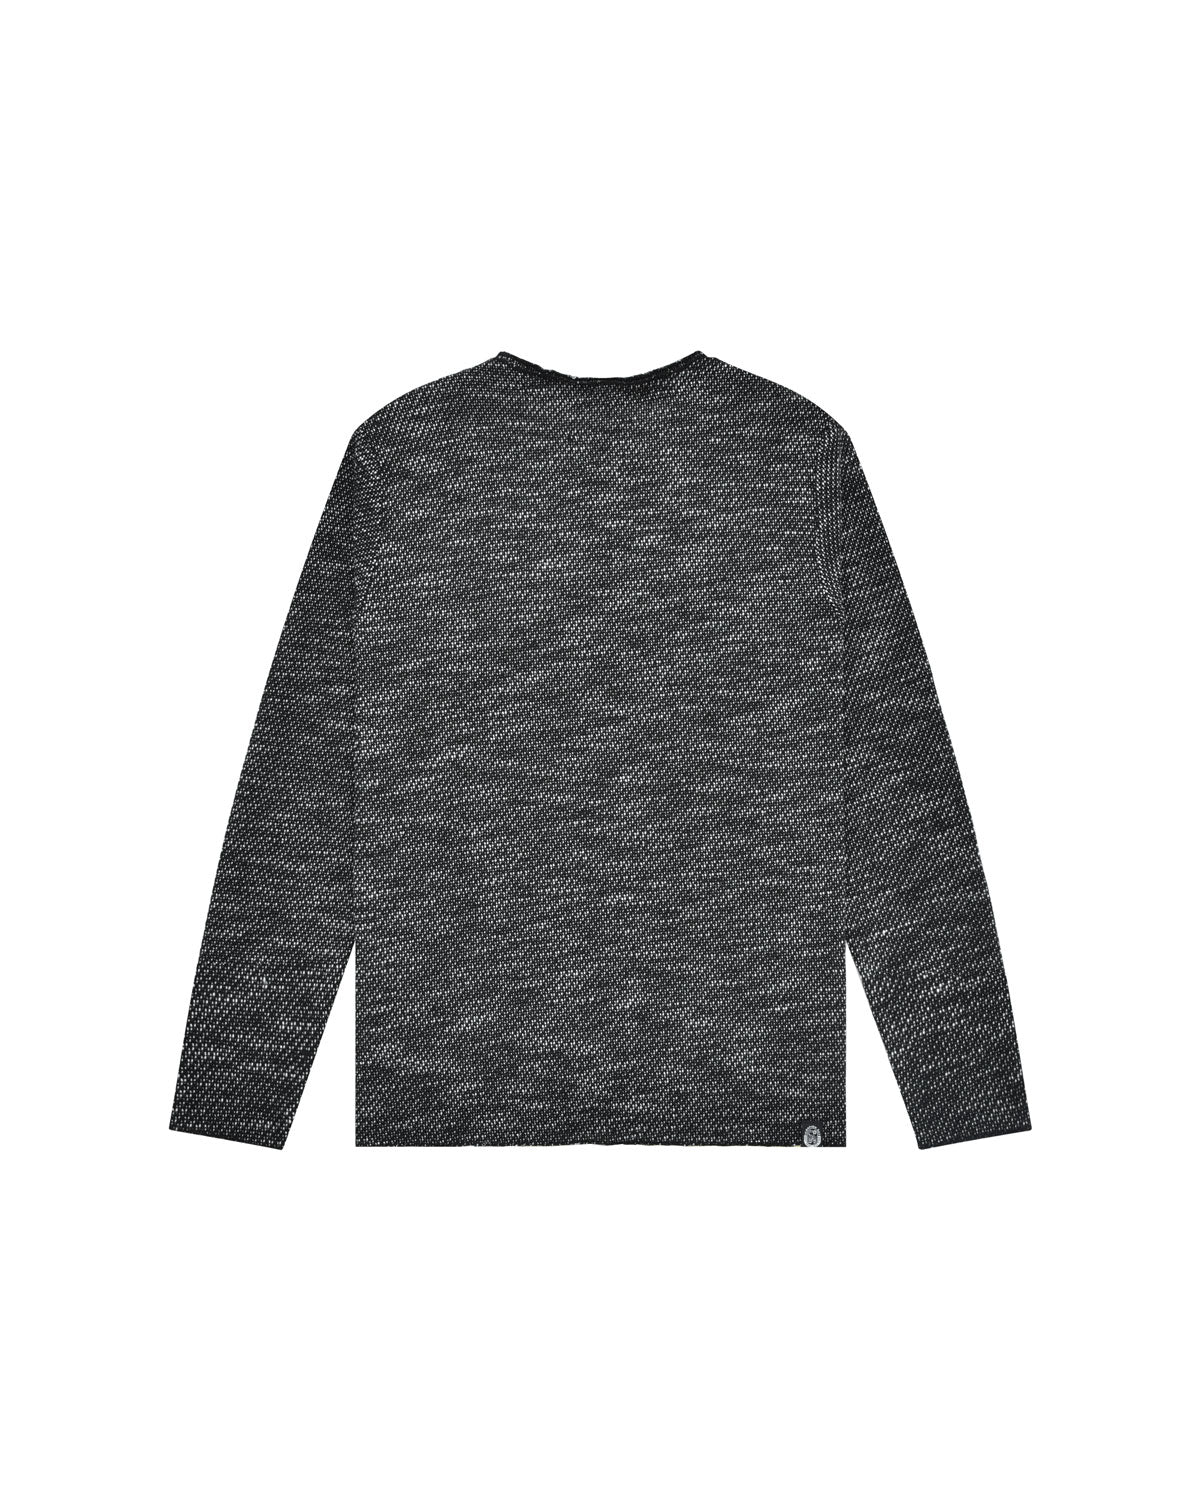 Man | Black Knitted Crew Neck Pullover